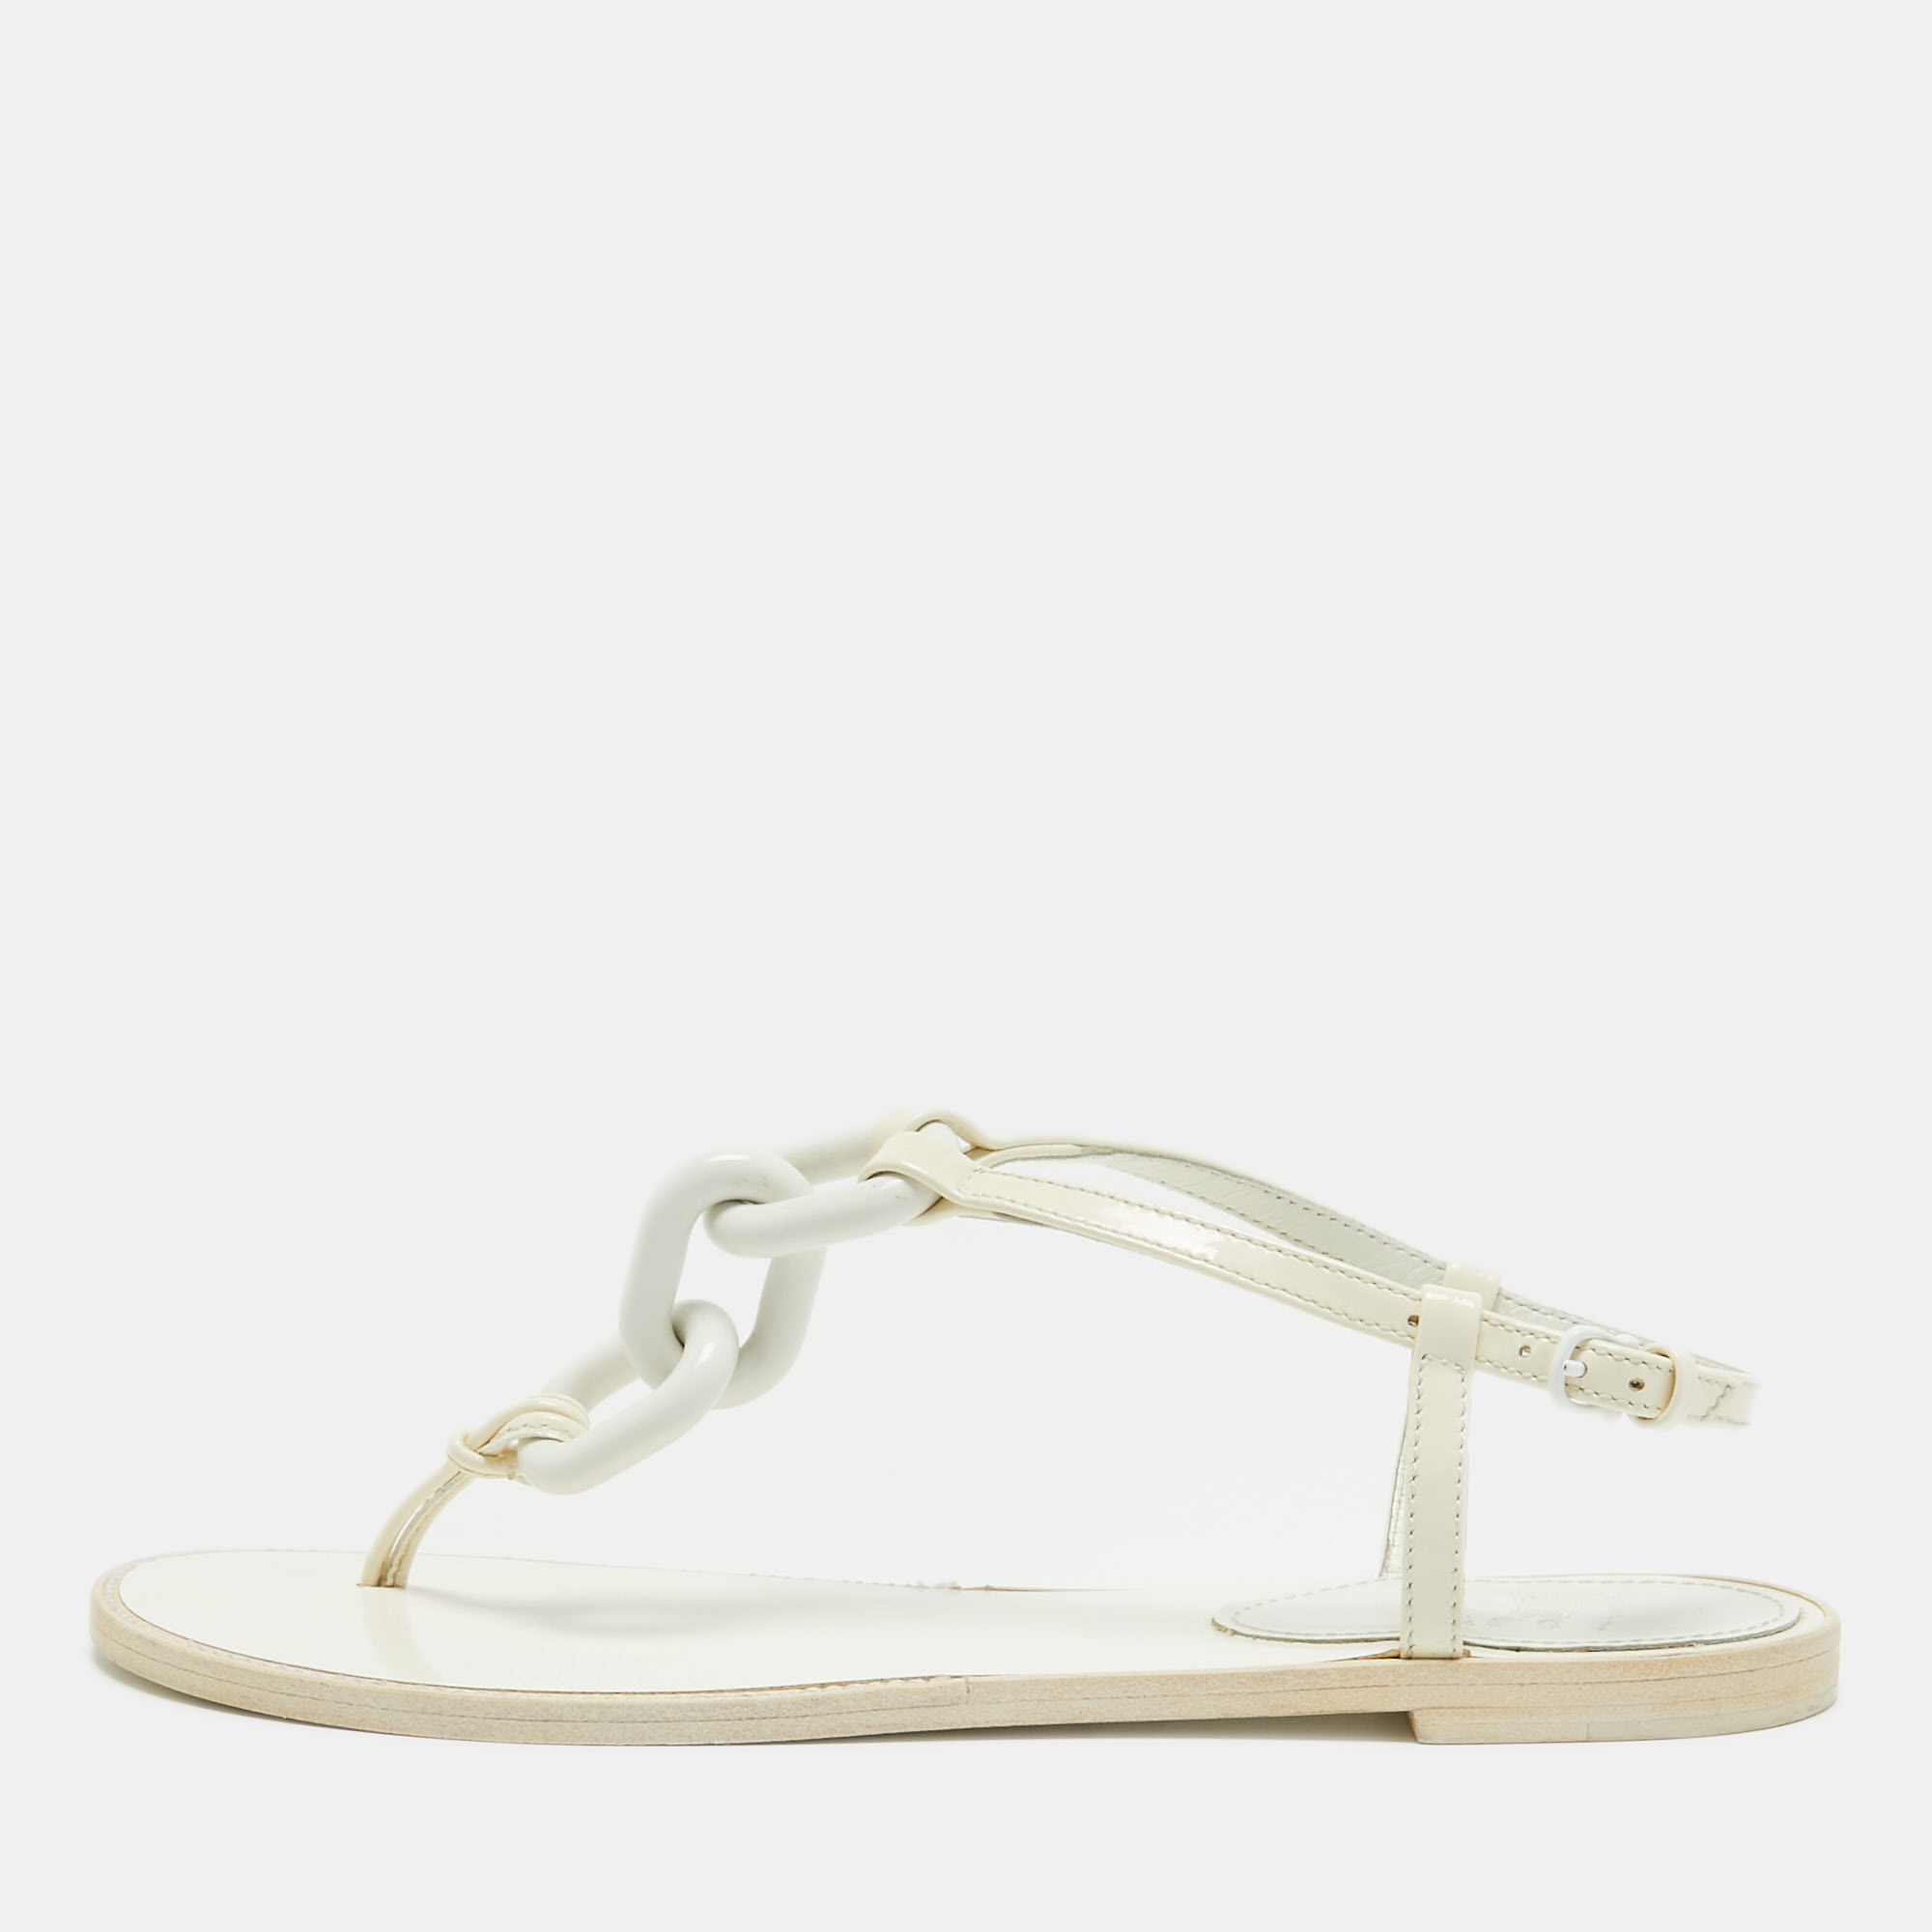 

Burberry Patent Leather White Thong Slingback Sandals Size